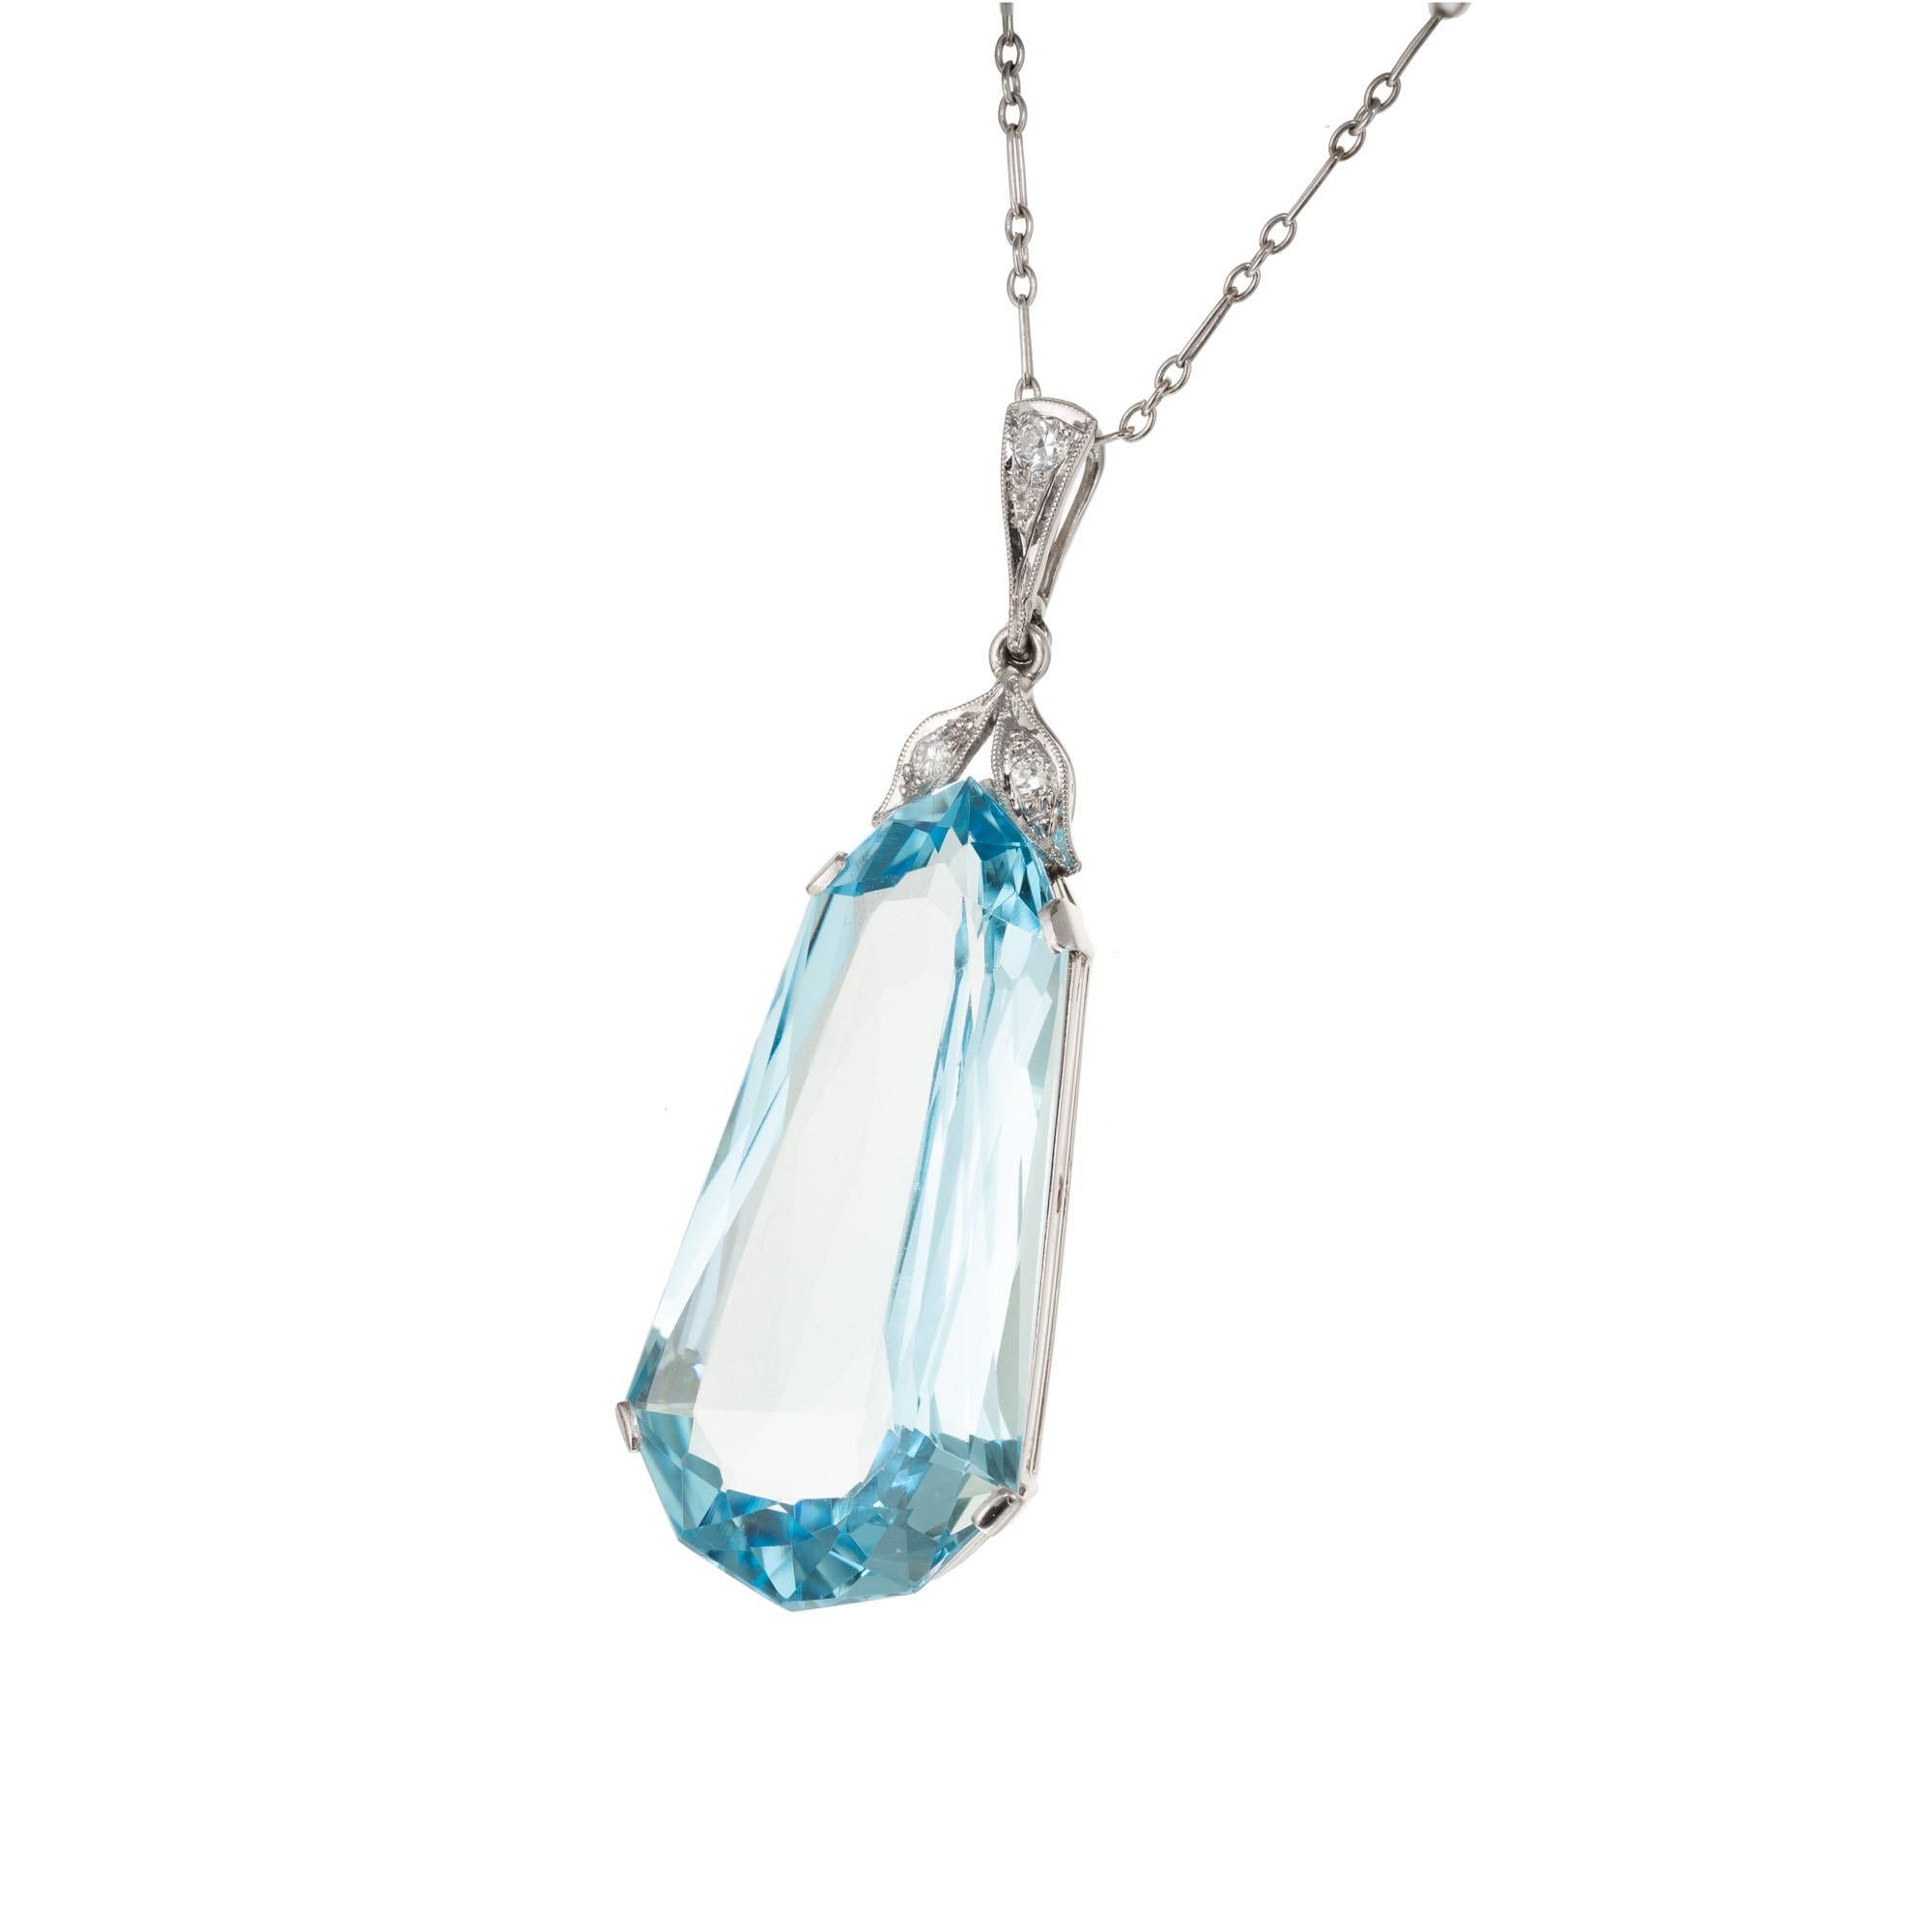 26.49 carat natural aquamarine sits in a vintage platinum setting accented with round diamonds, suspended on a 16 Inch open link platinum chain. All original Art Deco circa 1920's. GIA certified.

1 modified pear brilliant cut blue aquamarine,